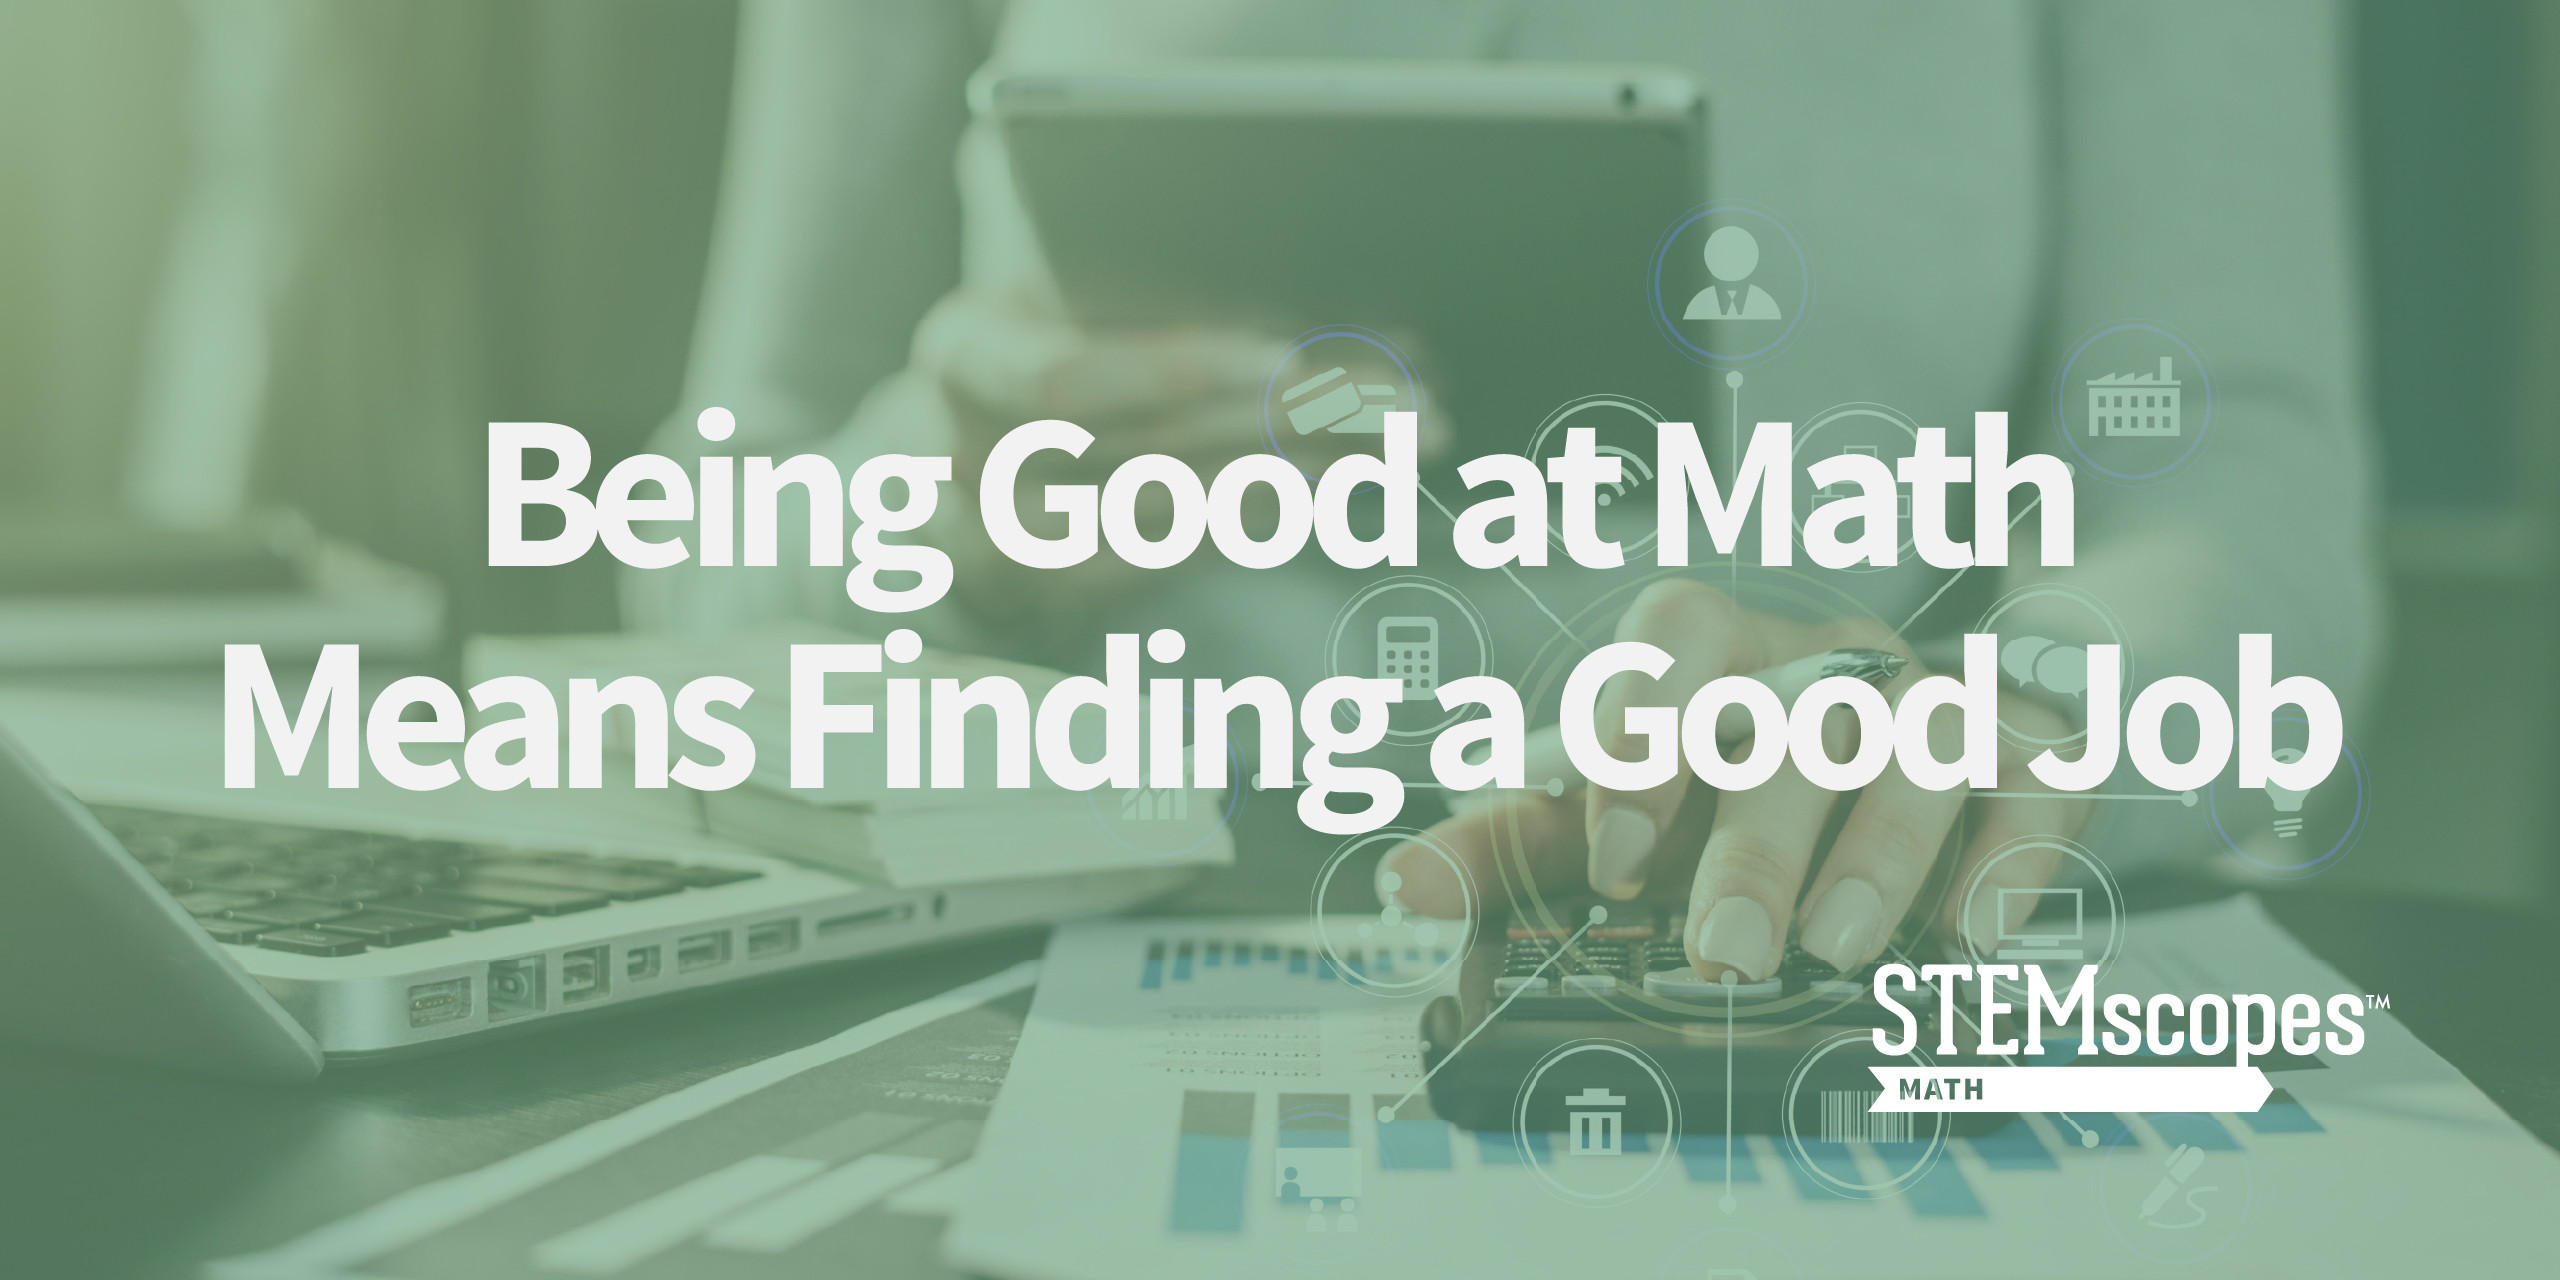 Being Good at Math Means Finding a Good Job